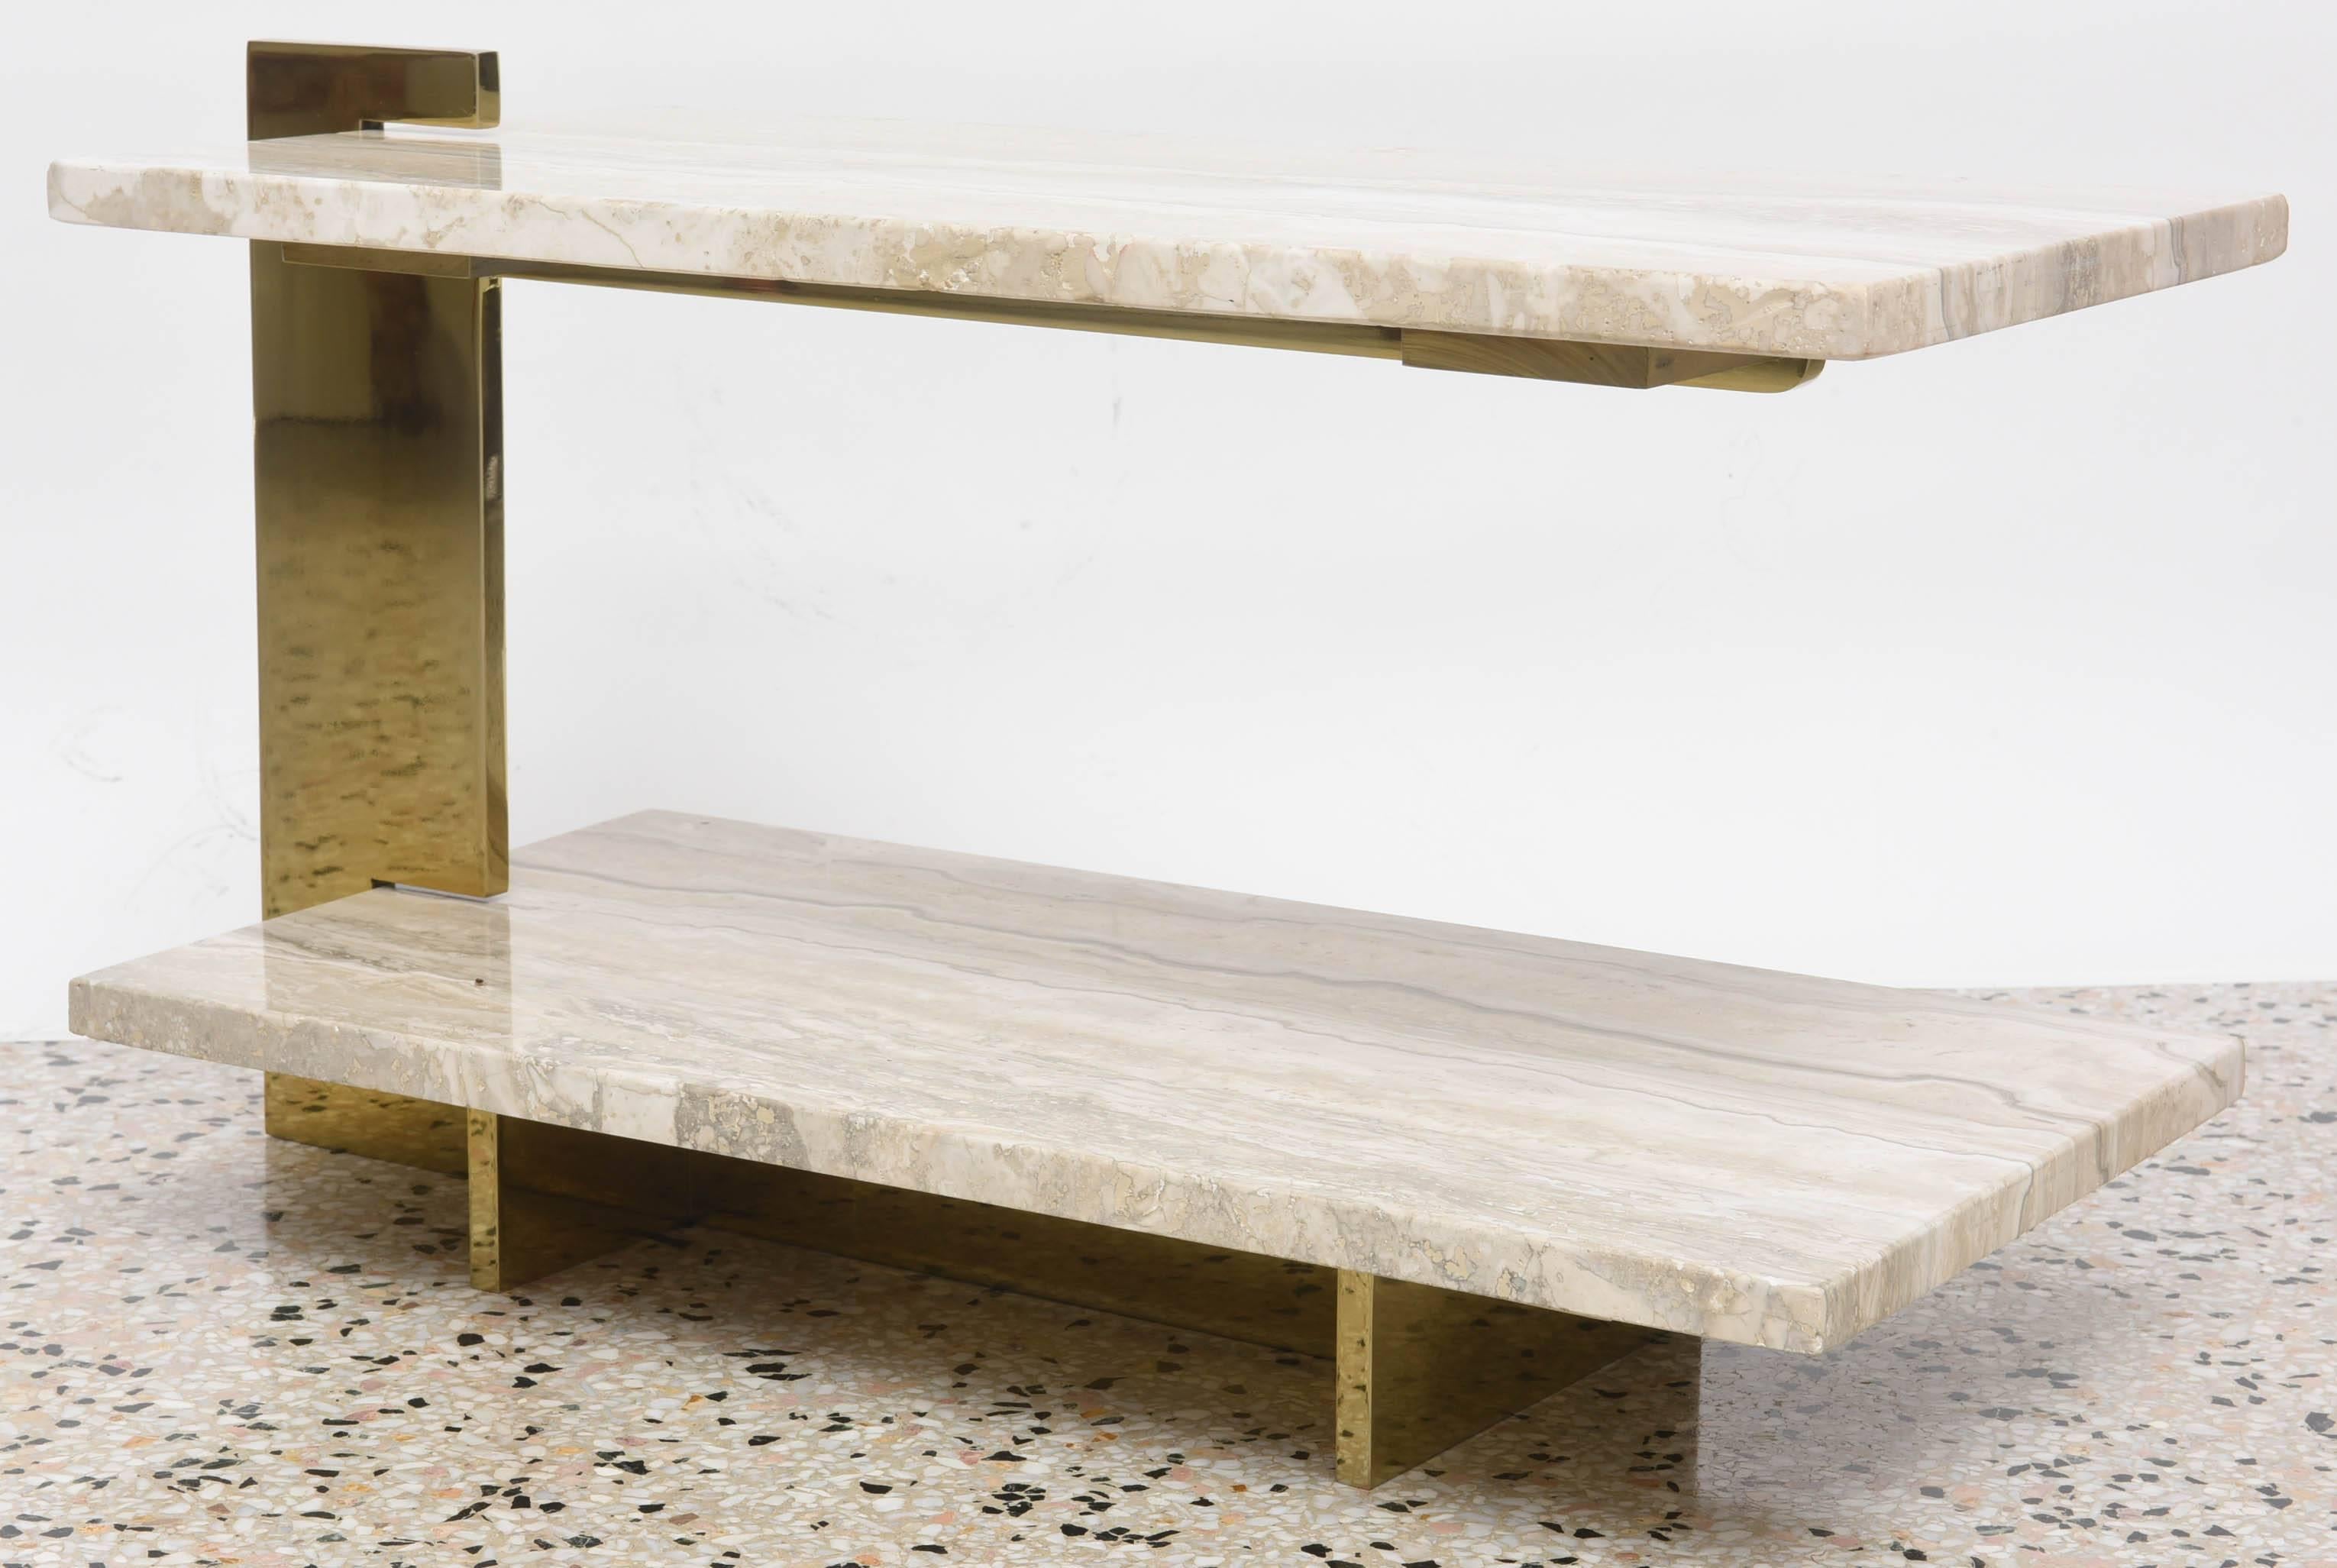 20th Century Two-Tiered Marble Side Table by Milo Baughman for Design Institute of America